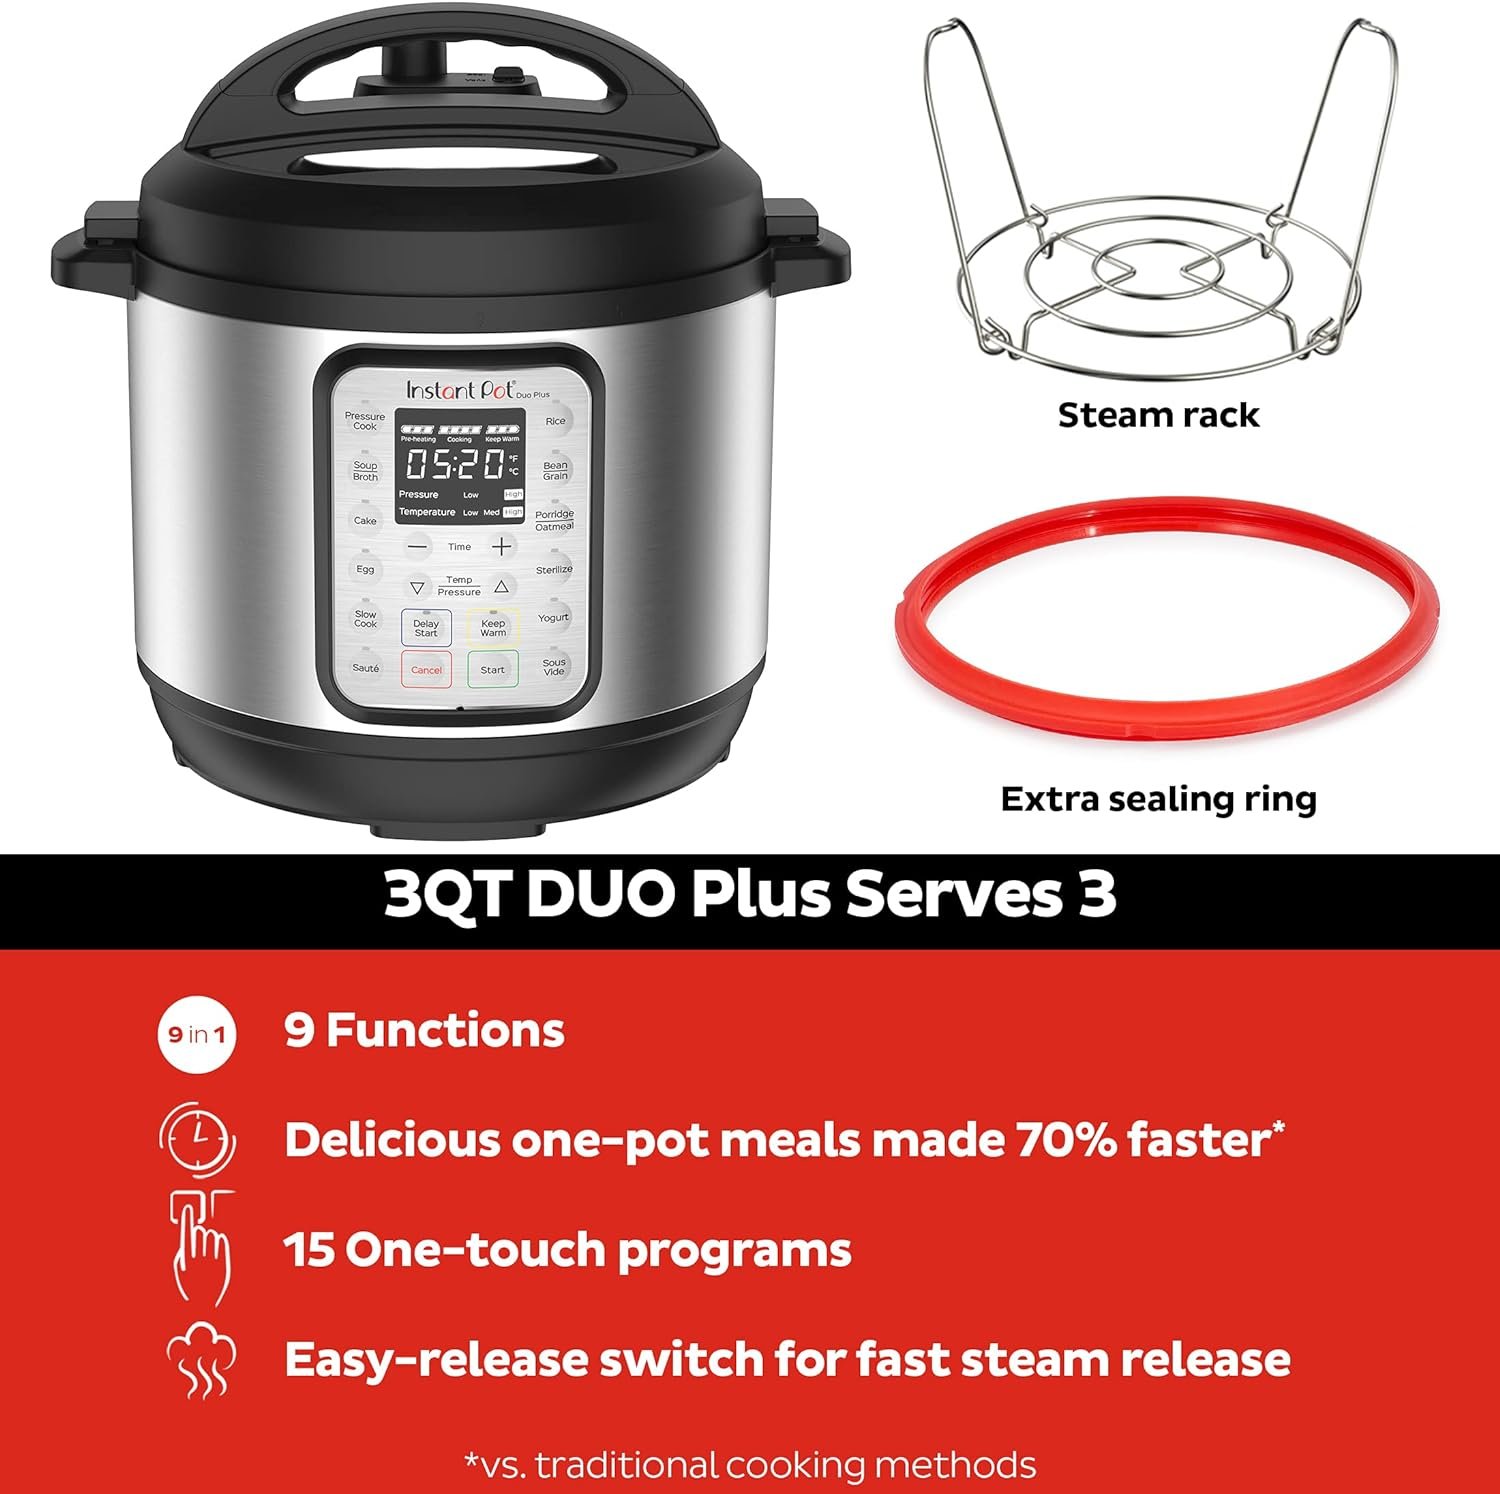 Instant Pot Duo Crisp Ultimate Lid, 13-in-1 Air Fryer and Pressure Cooker Combo, Sauté, Slow Cook, Bake, Steam, Warm, Roast, Dehydrate, Sous Vide,  Proof, App With Over 800 Recipes, 6.5 Quart